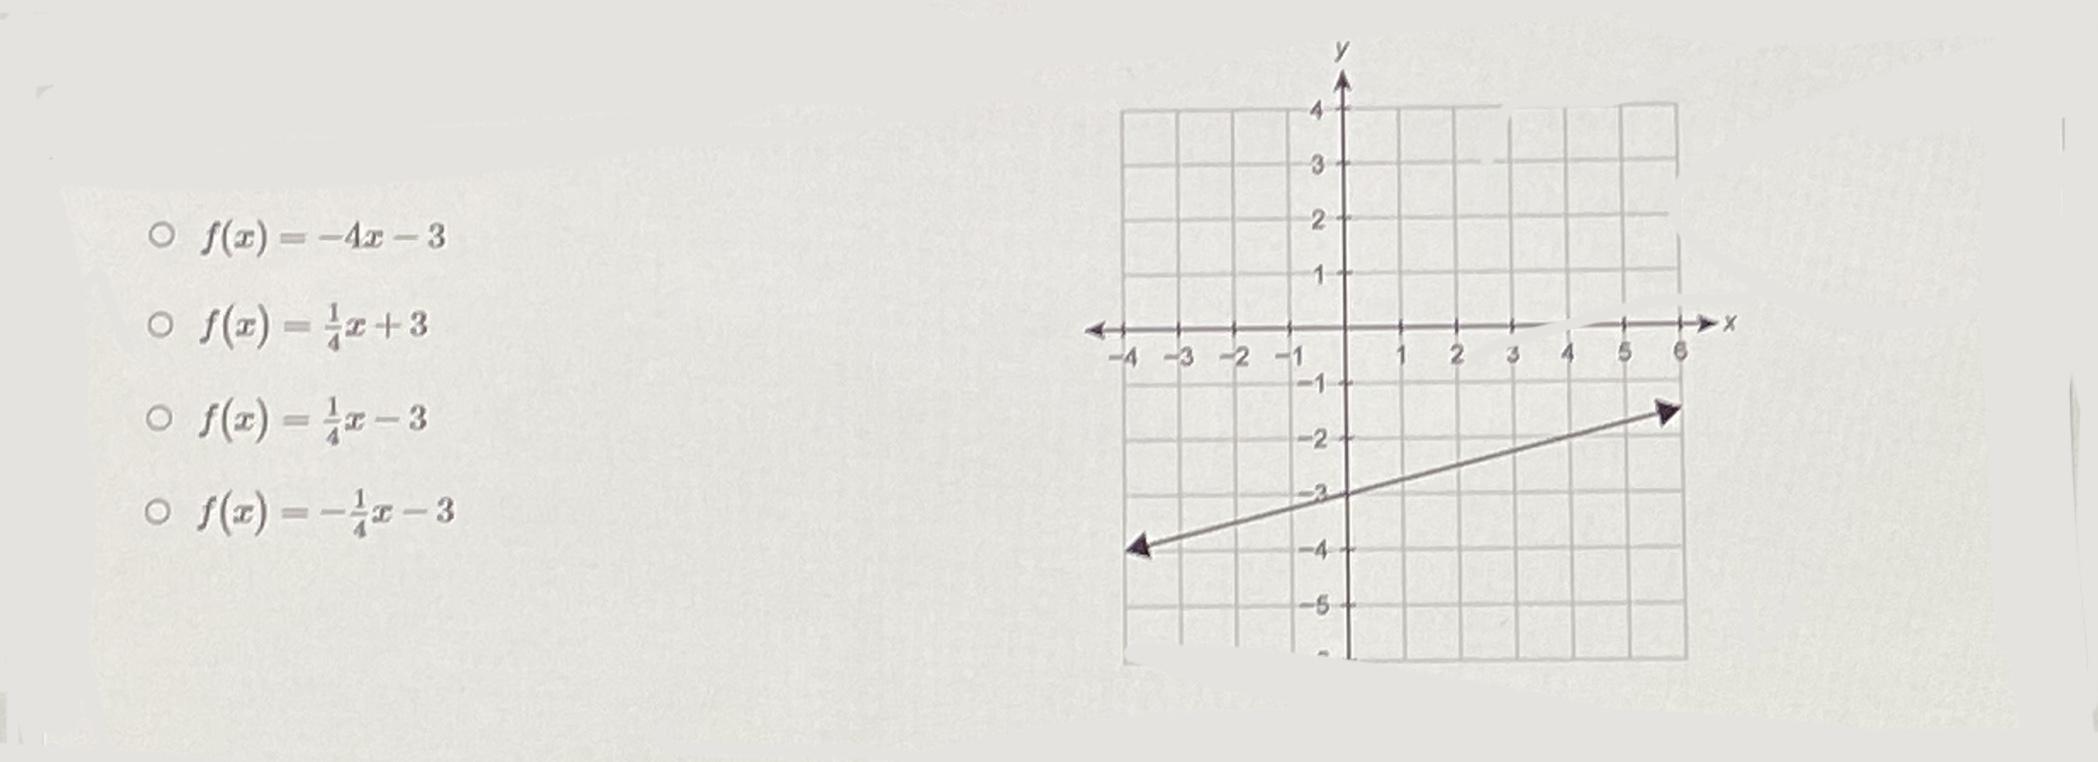 What Function Equation Is Represented By The Graph?